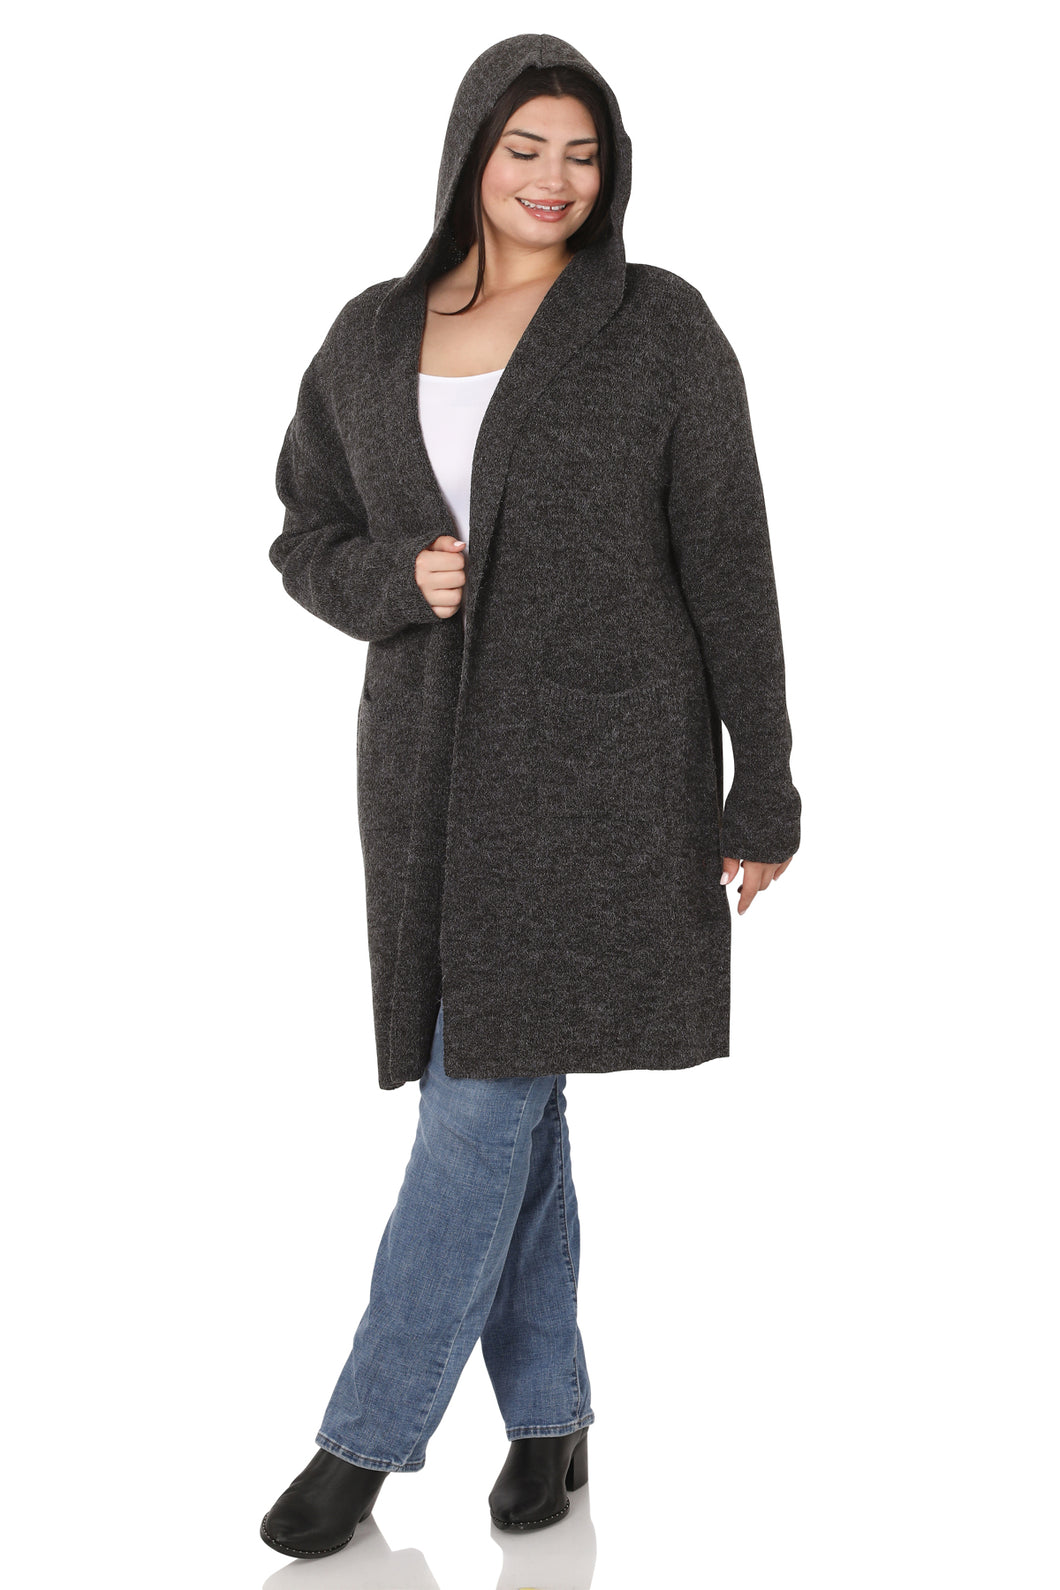 Hooded Sweater Cardigan (Charcoal)